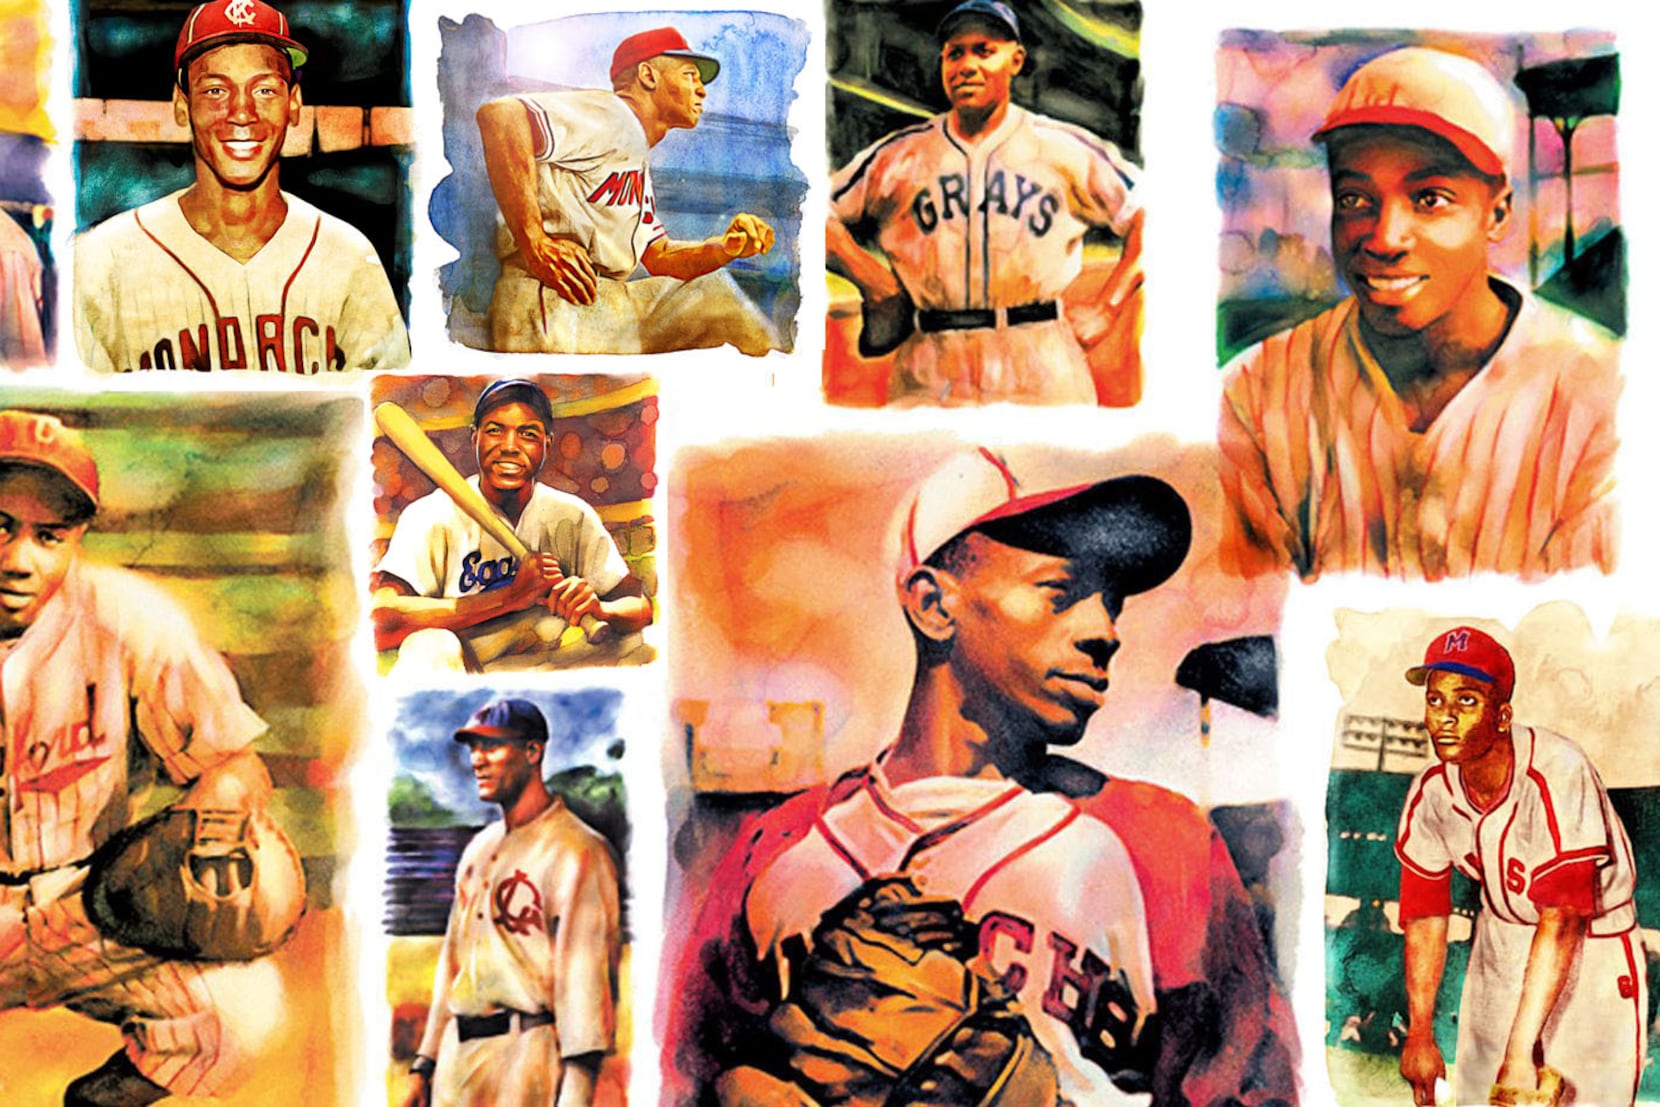 Top 100 MLB players of all time - What if Oscar Charleston is the